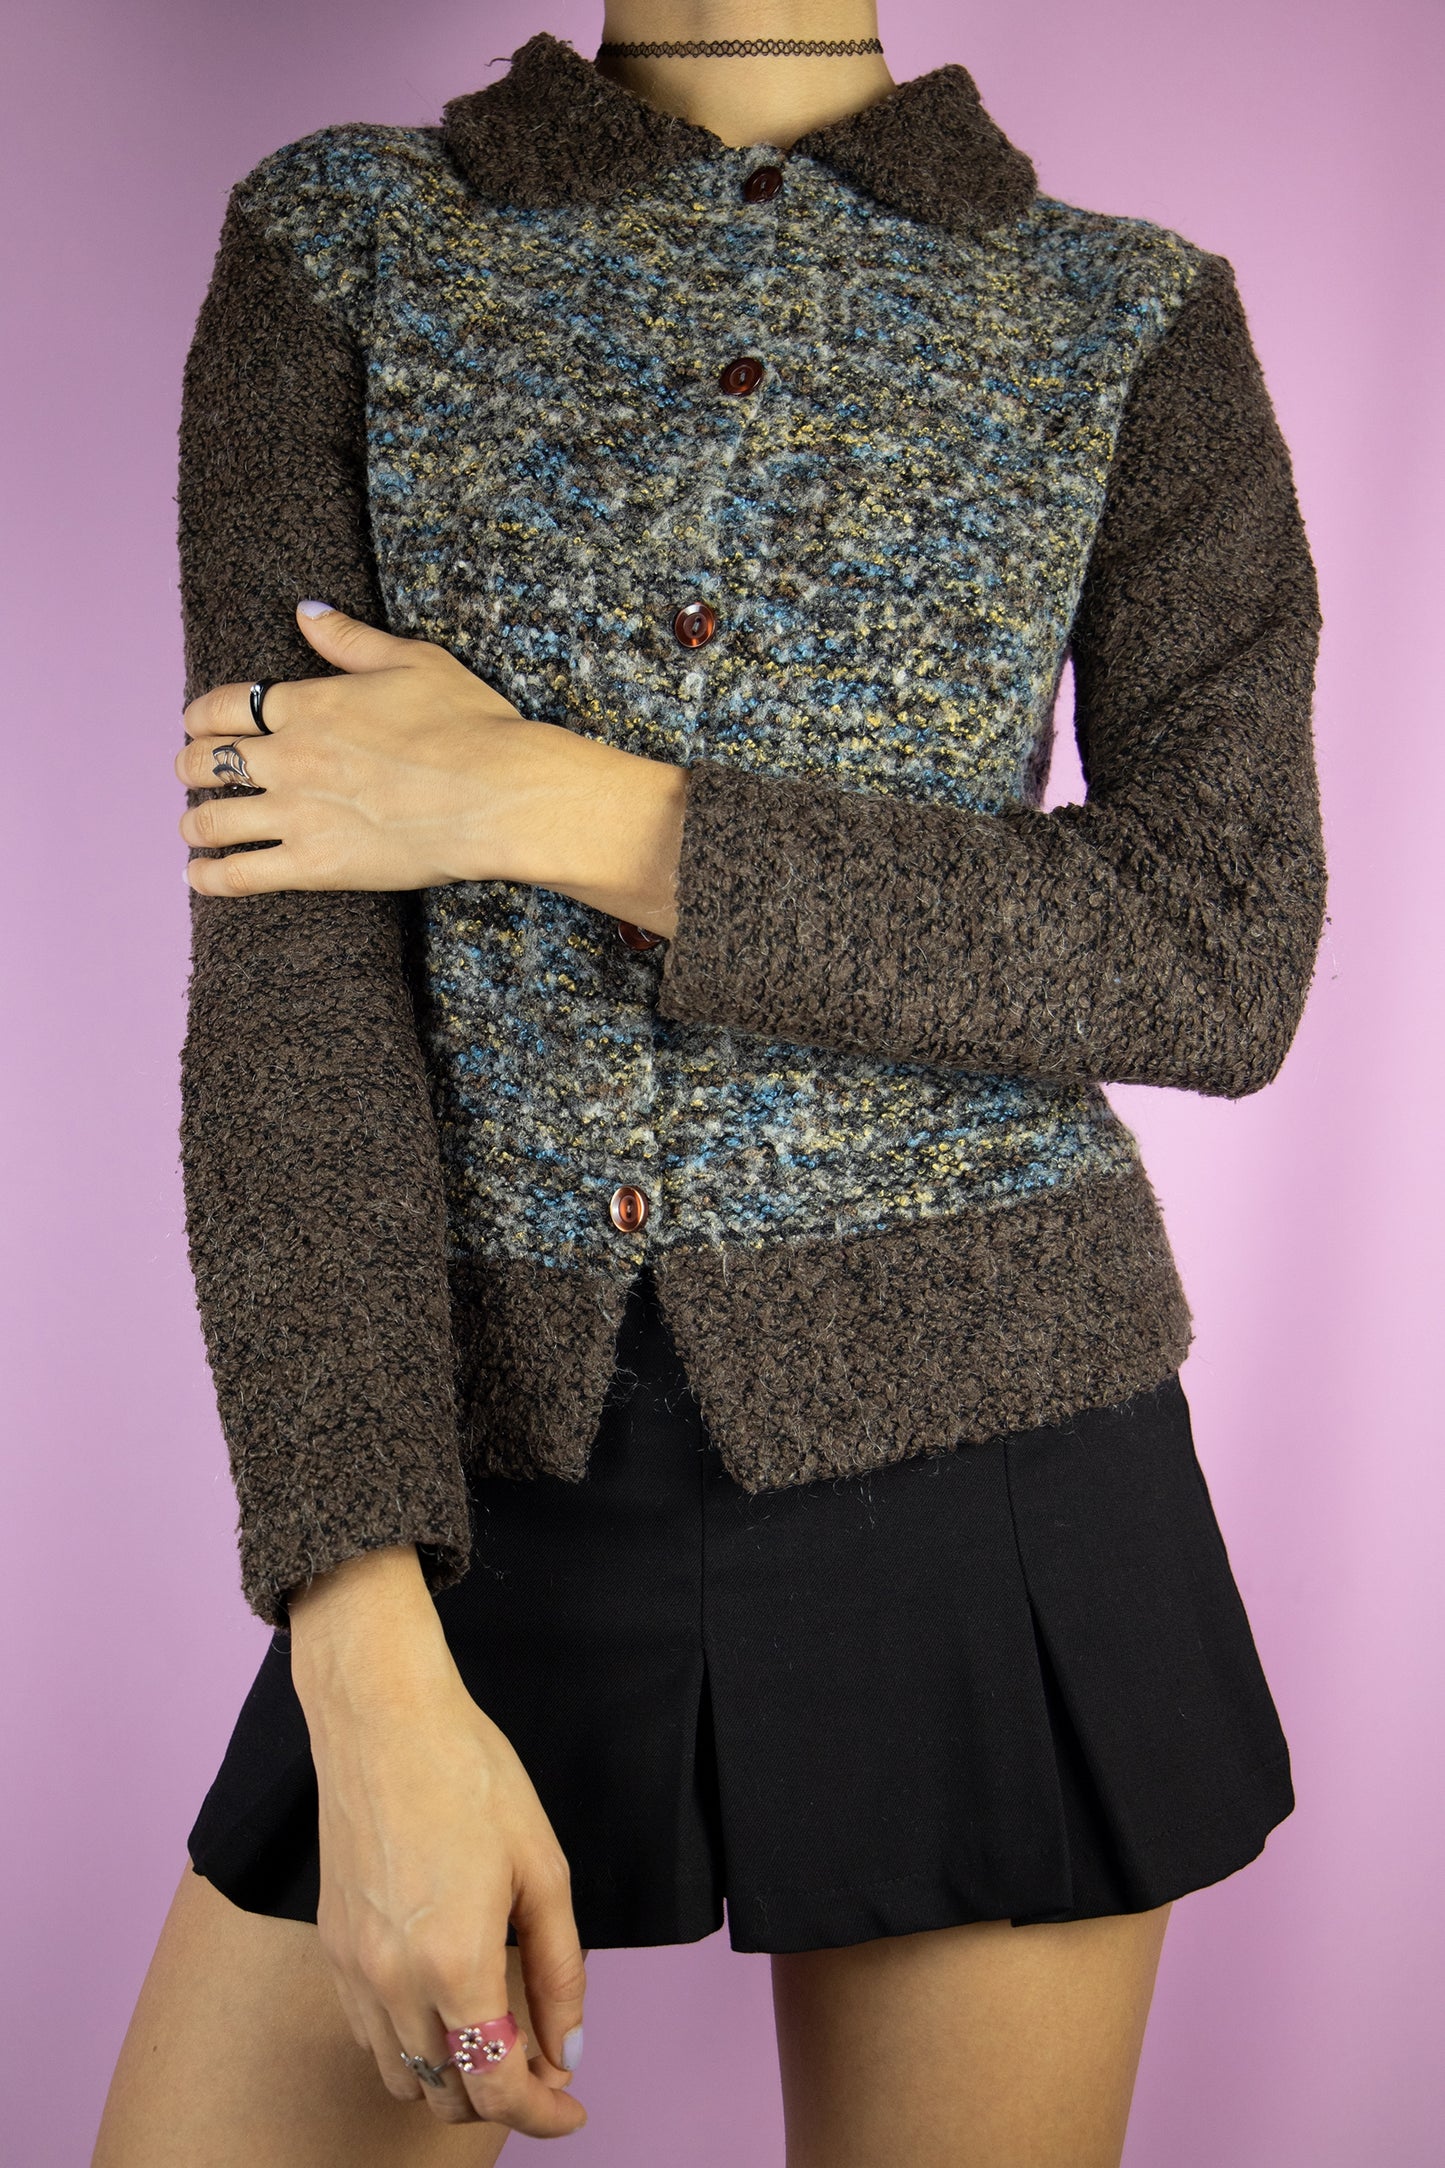 The Vintage 90s Fairy Grunge Brown Cardigan is a dark brown, beige and blue wool blend cardigan with a collar and buttons. Boho 1990s knit sweater.